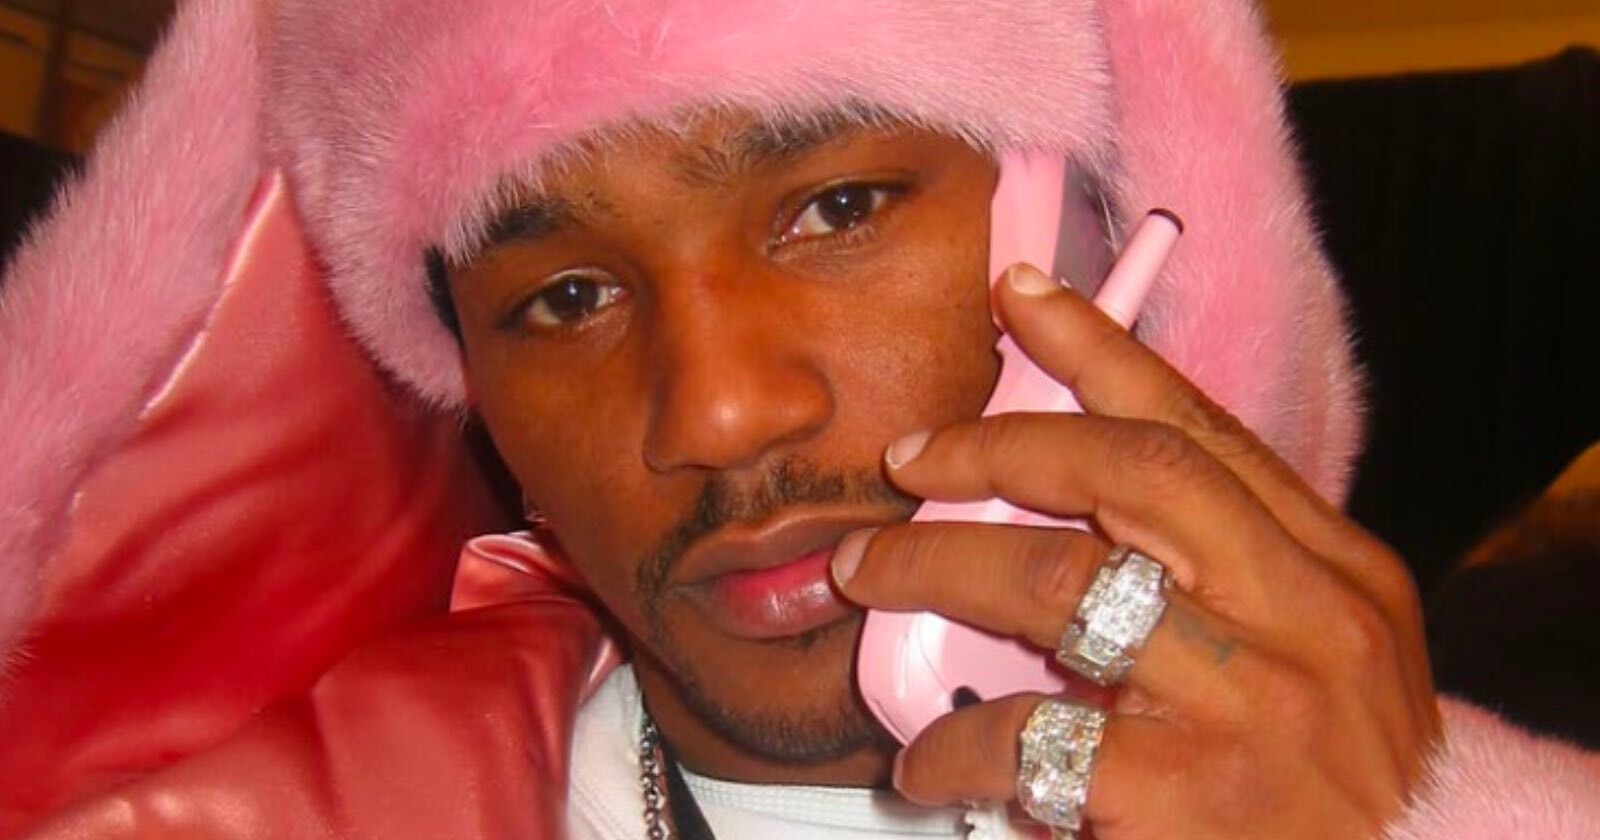 Rapper Camron Sued for Using Iconic Photo of Himself Without Permission